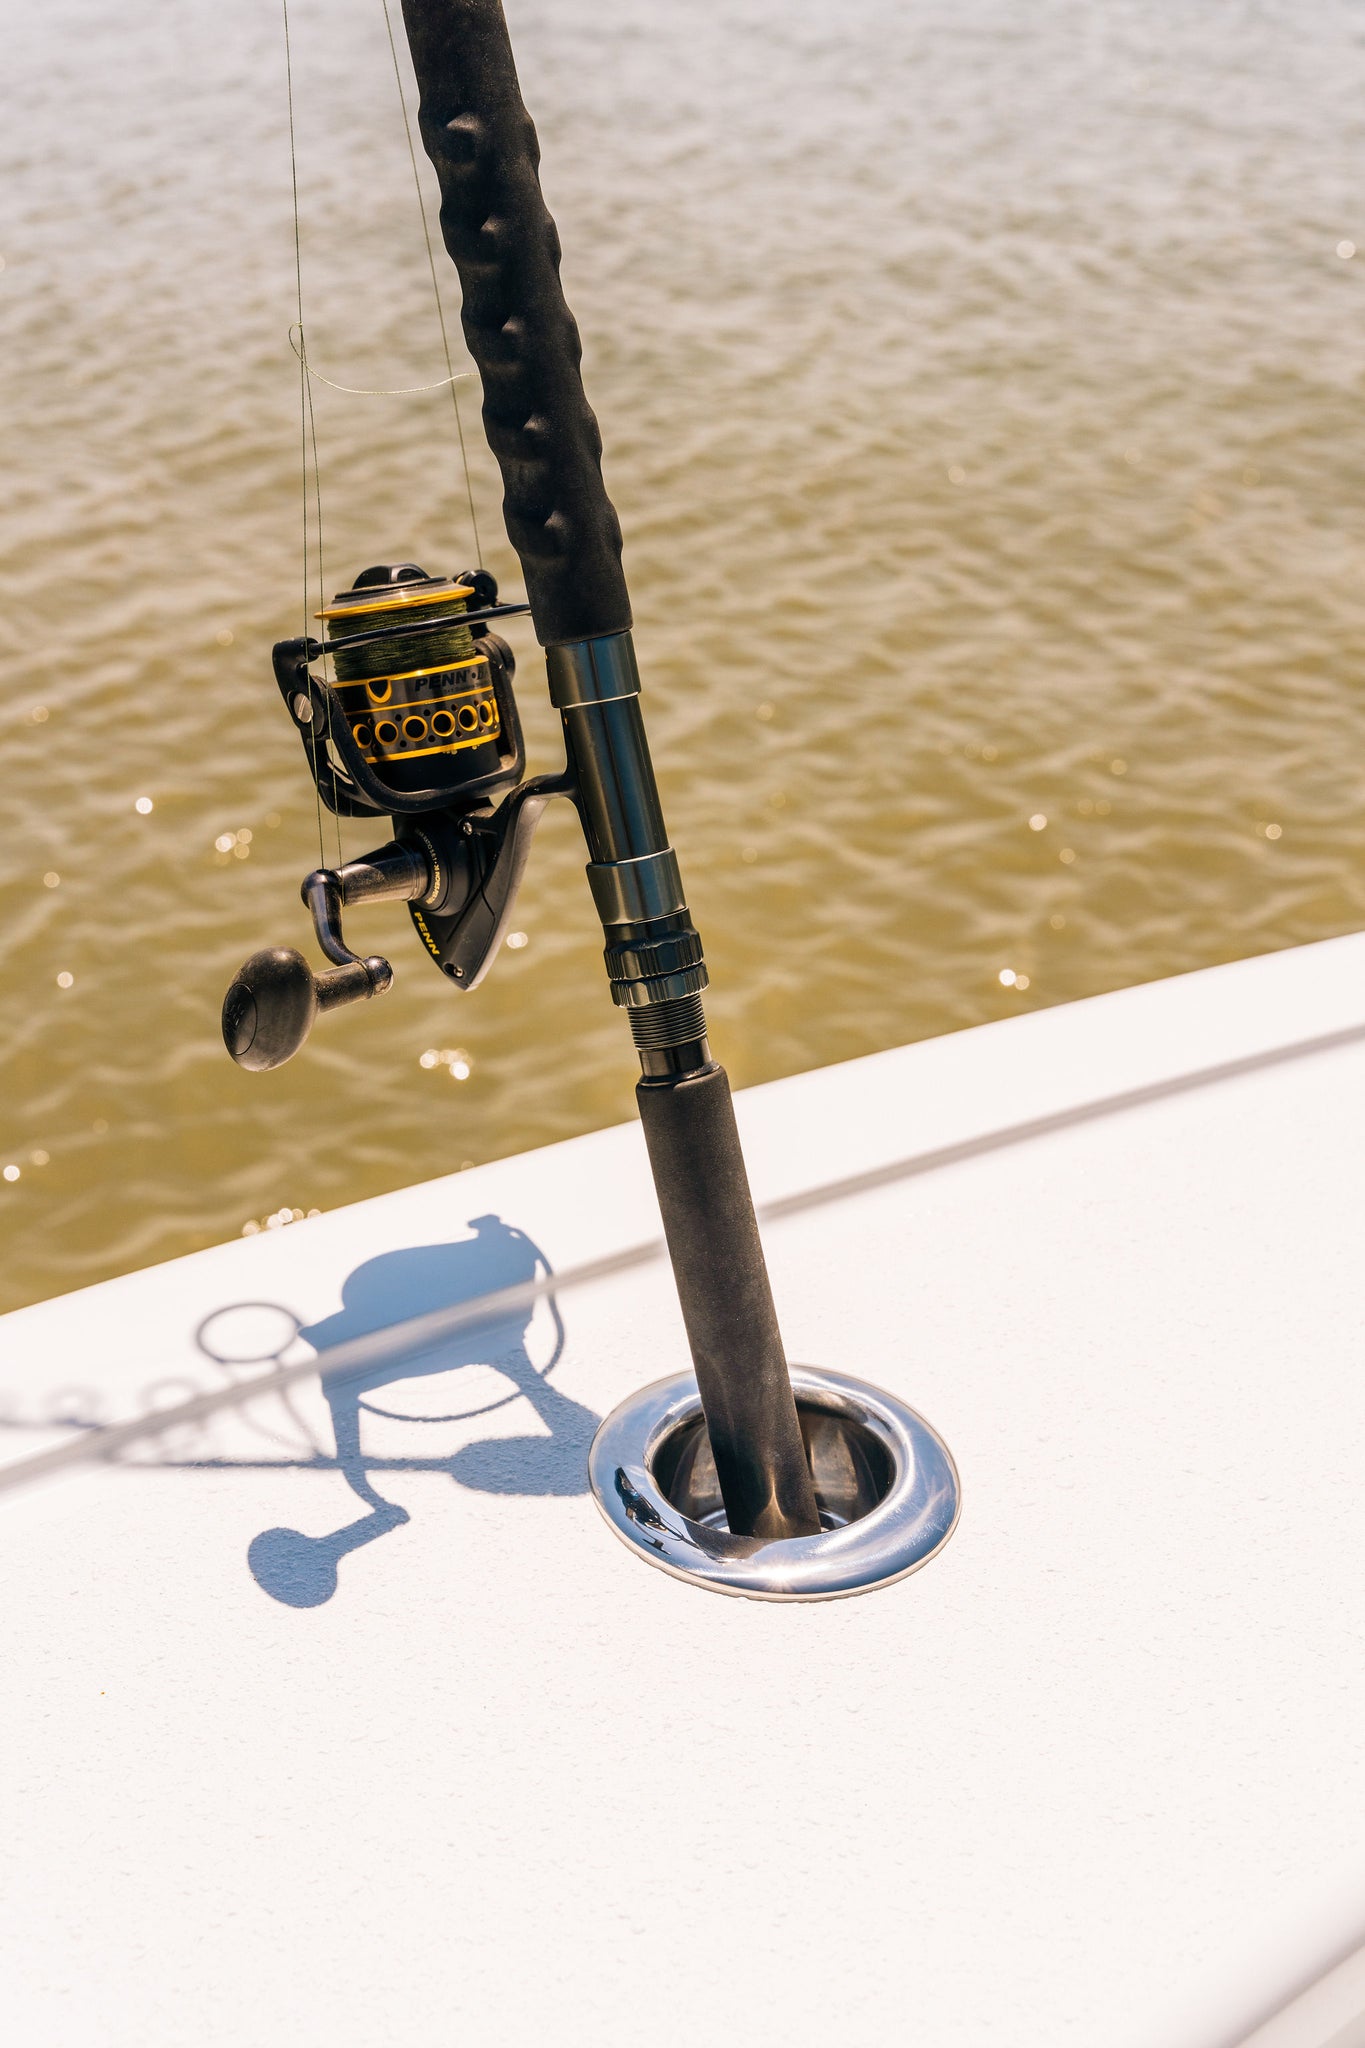  CREDSTAR Stainless Steel Fishing Rod Holders for Boat